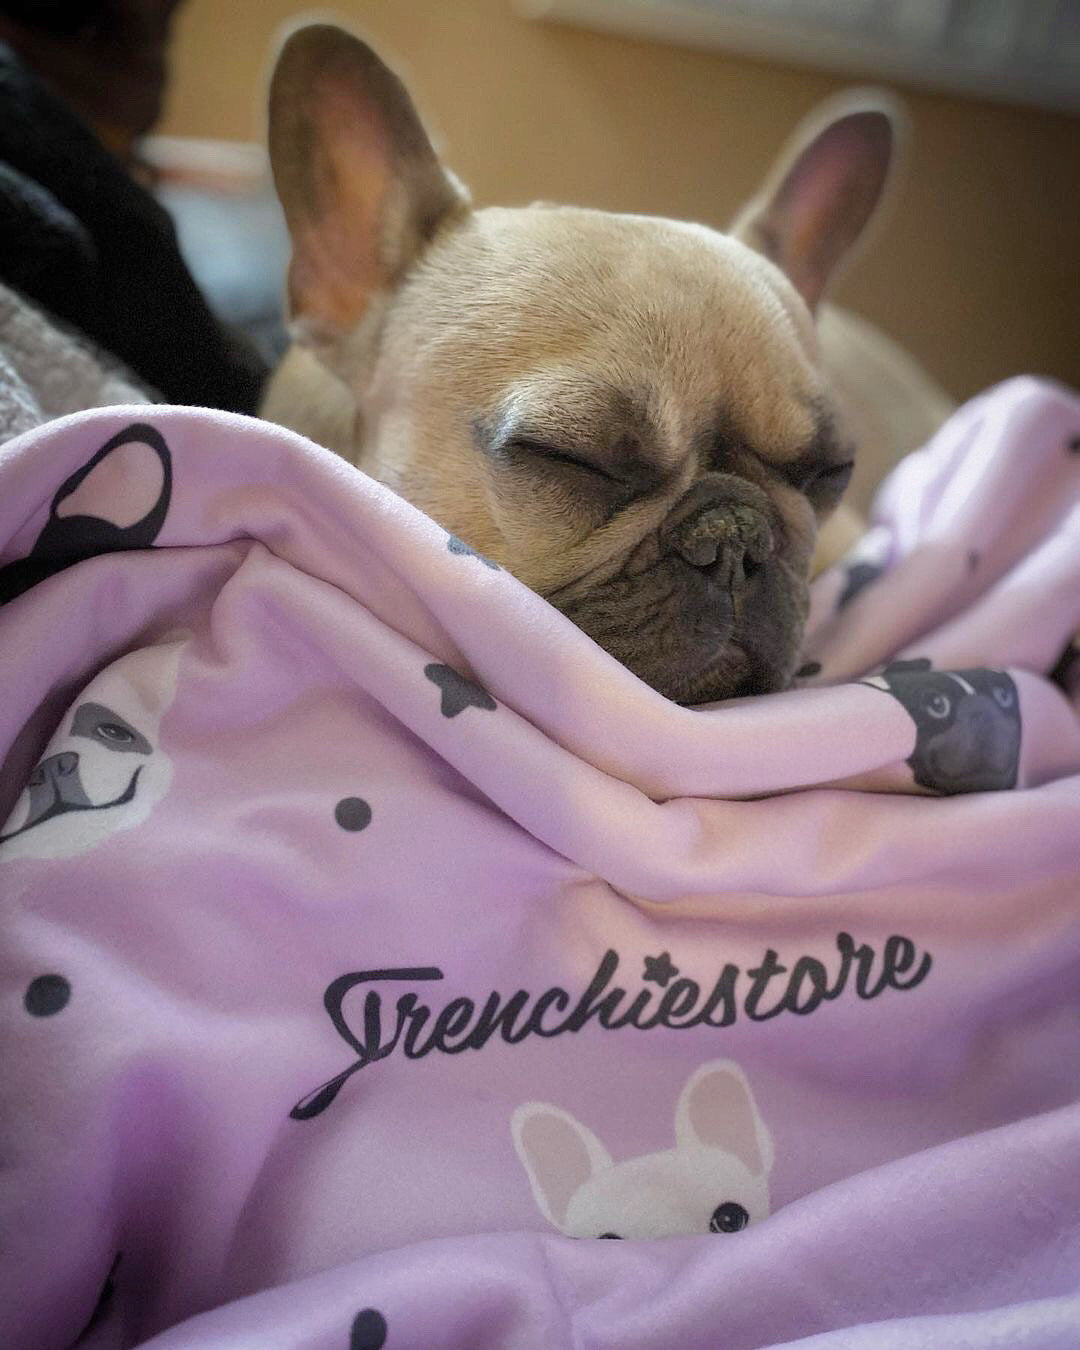 do french bulldogs need blankets? 2